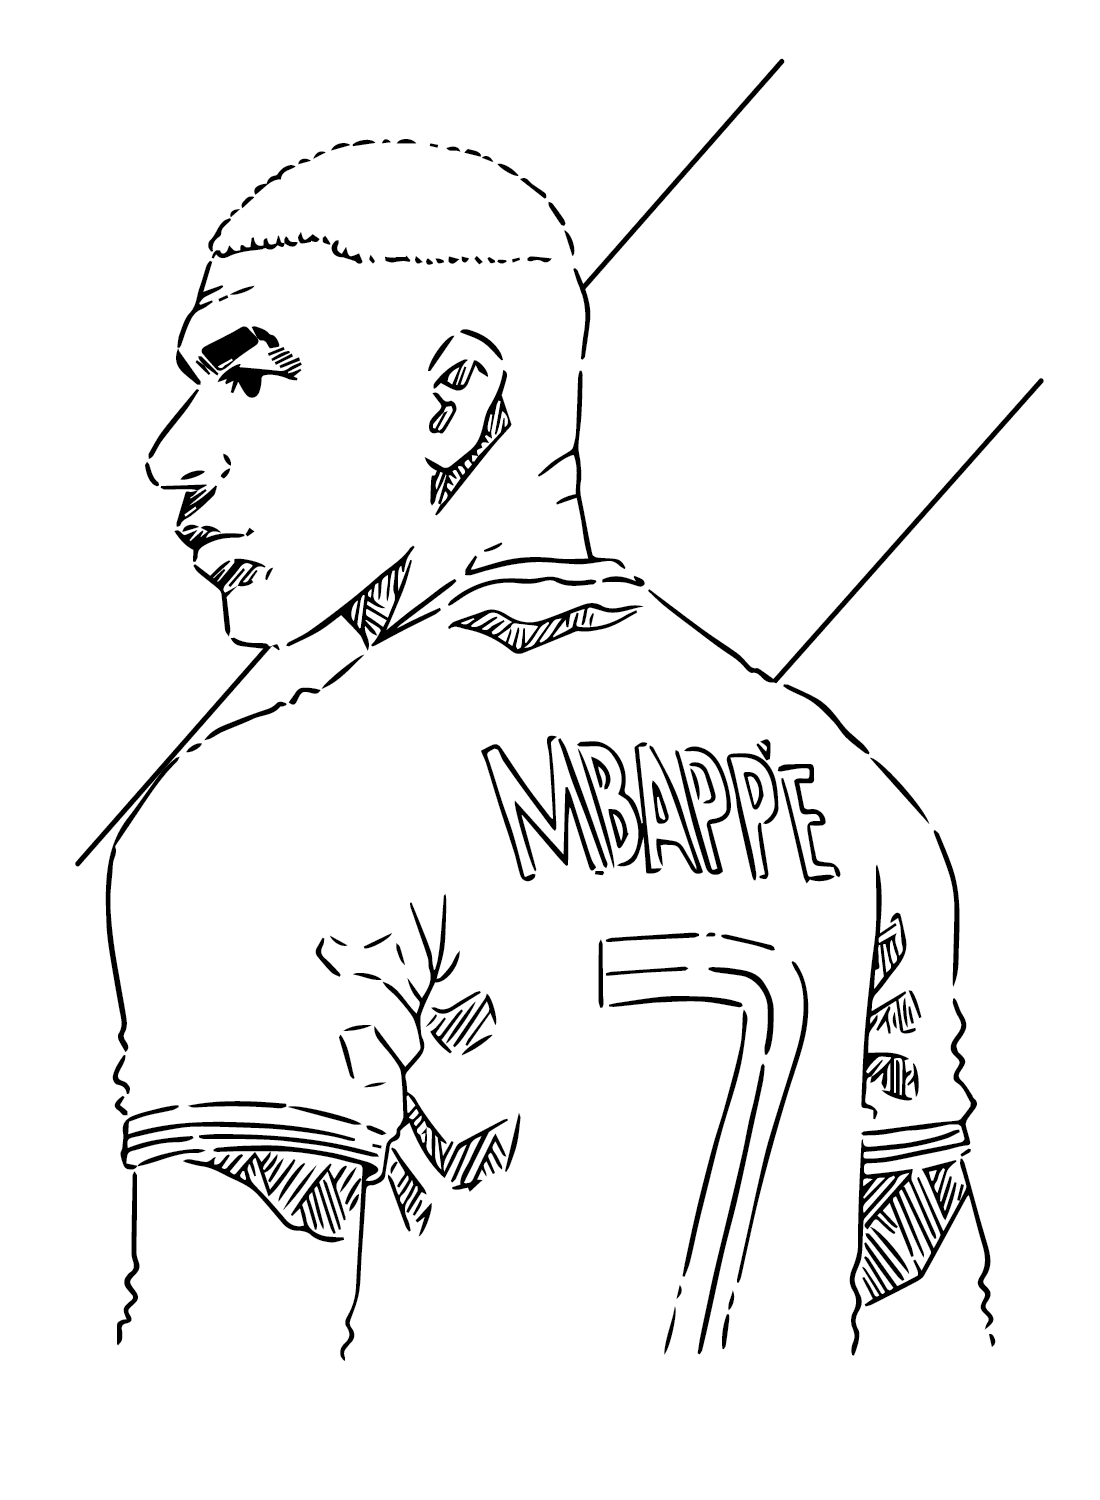 Kylian Mbappé Football Player Coloring Page